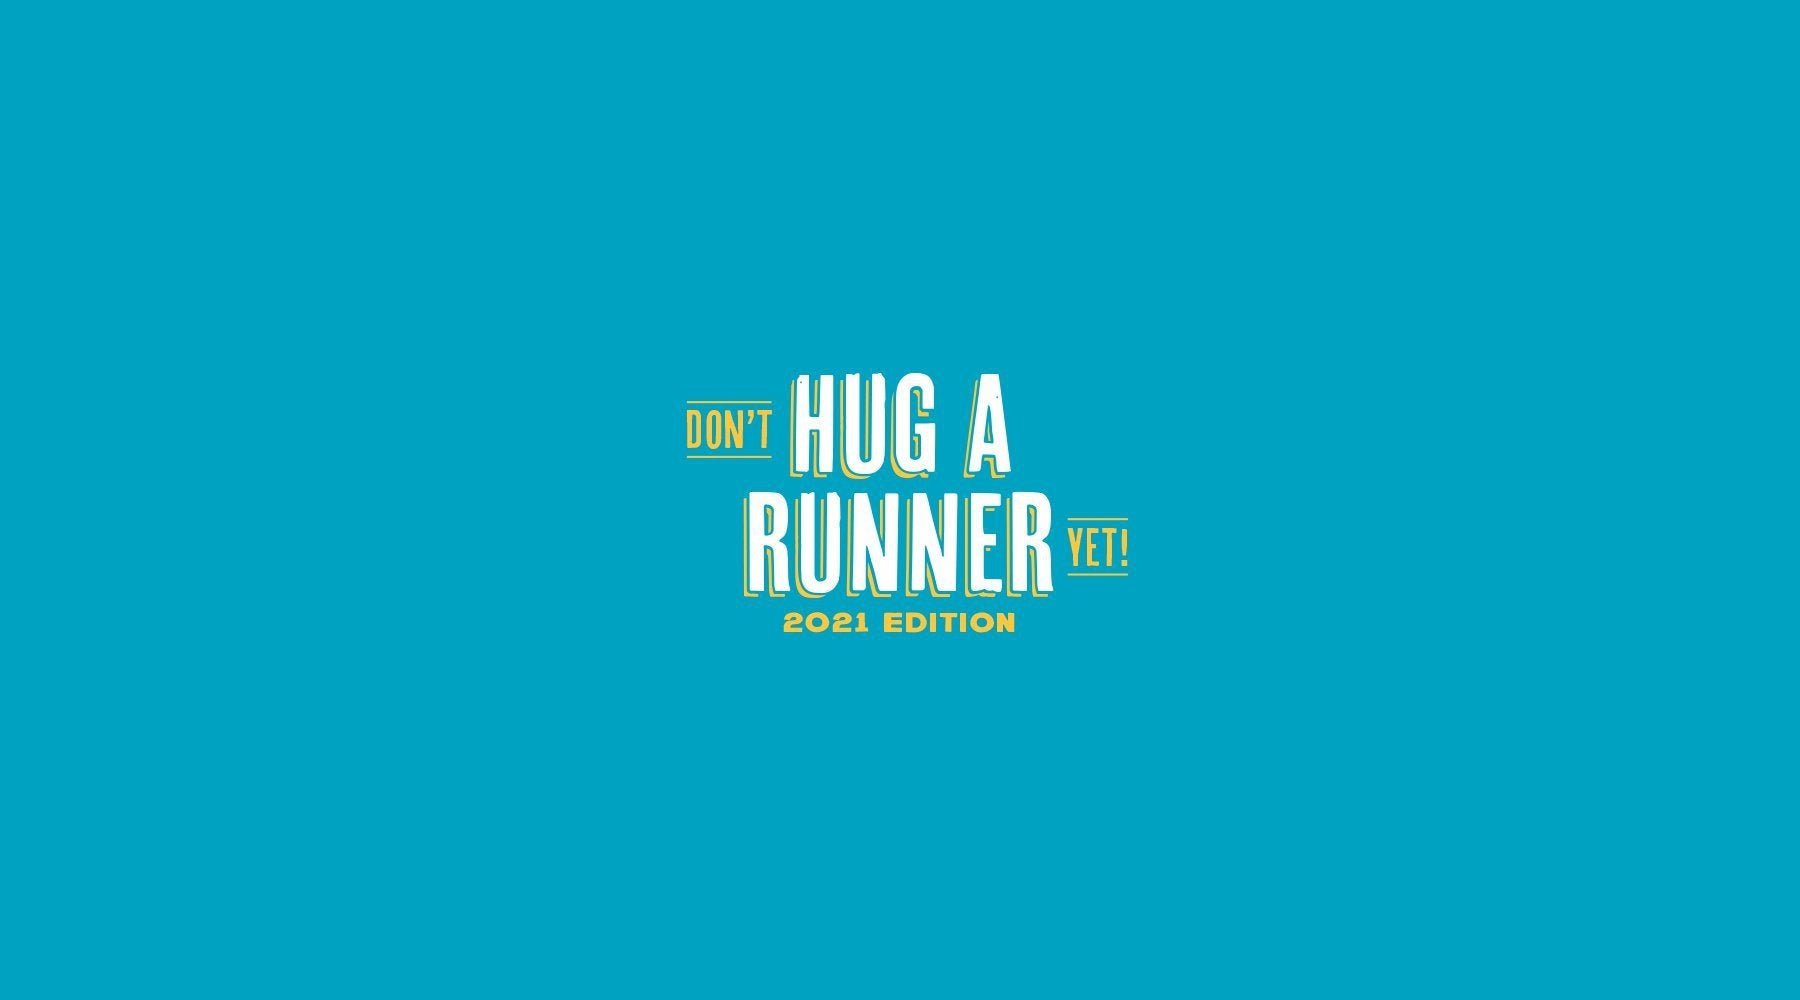 How to Not Hug a Runner Yet in 2021! - Virtual Fitness Challenge Blog | Run The Edge